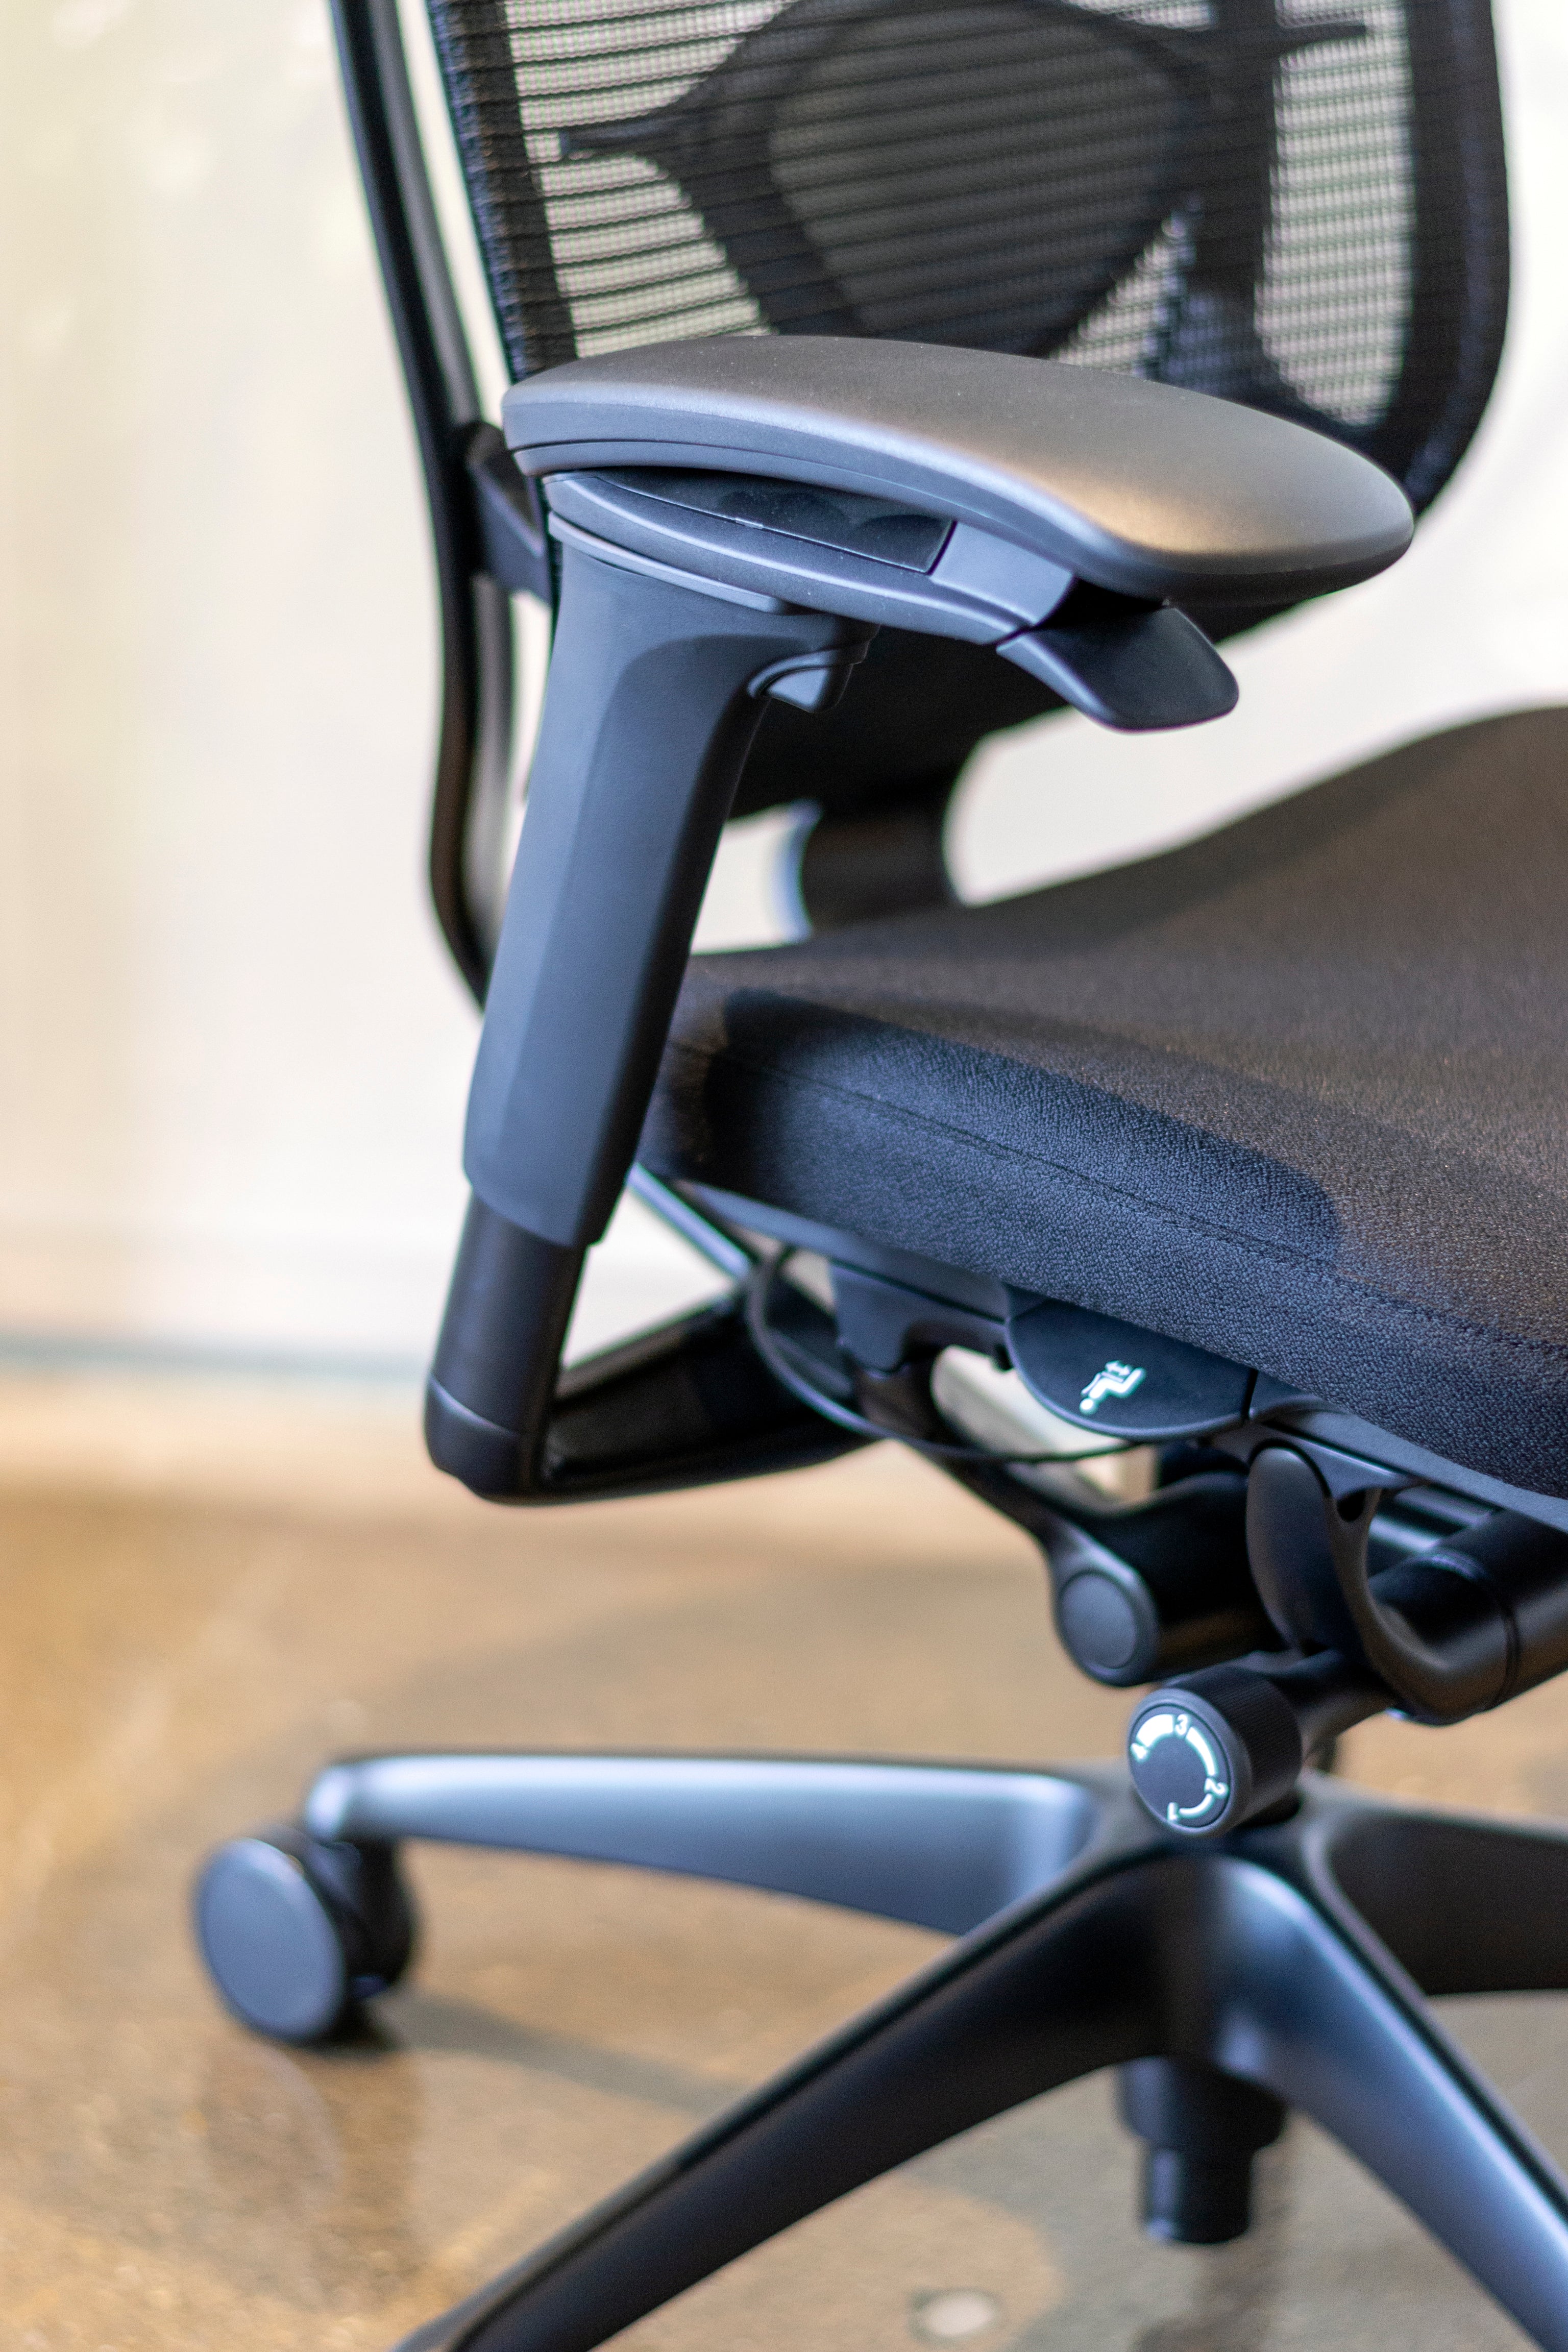 Close up side view of black Nuova work chair showing multiple adjustment levers located on arm rests on seat pan.